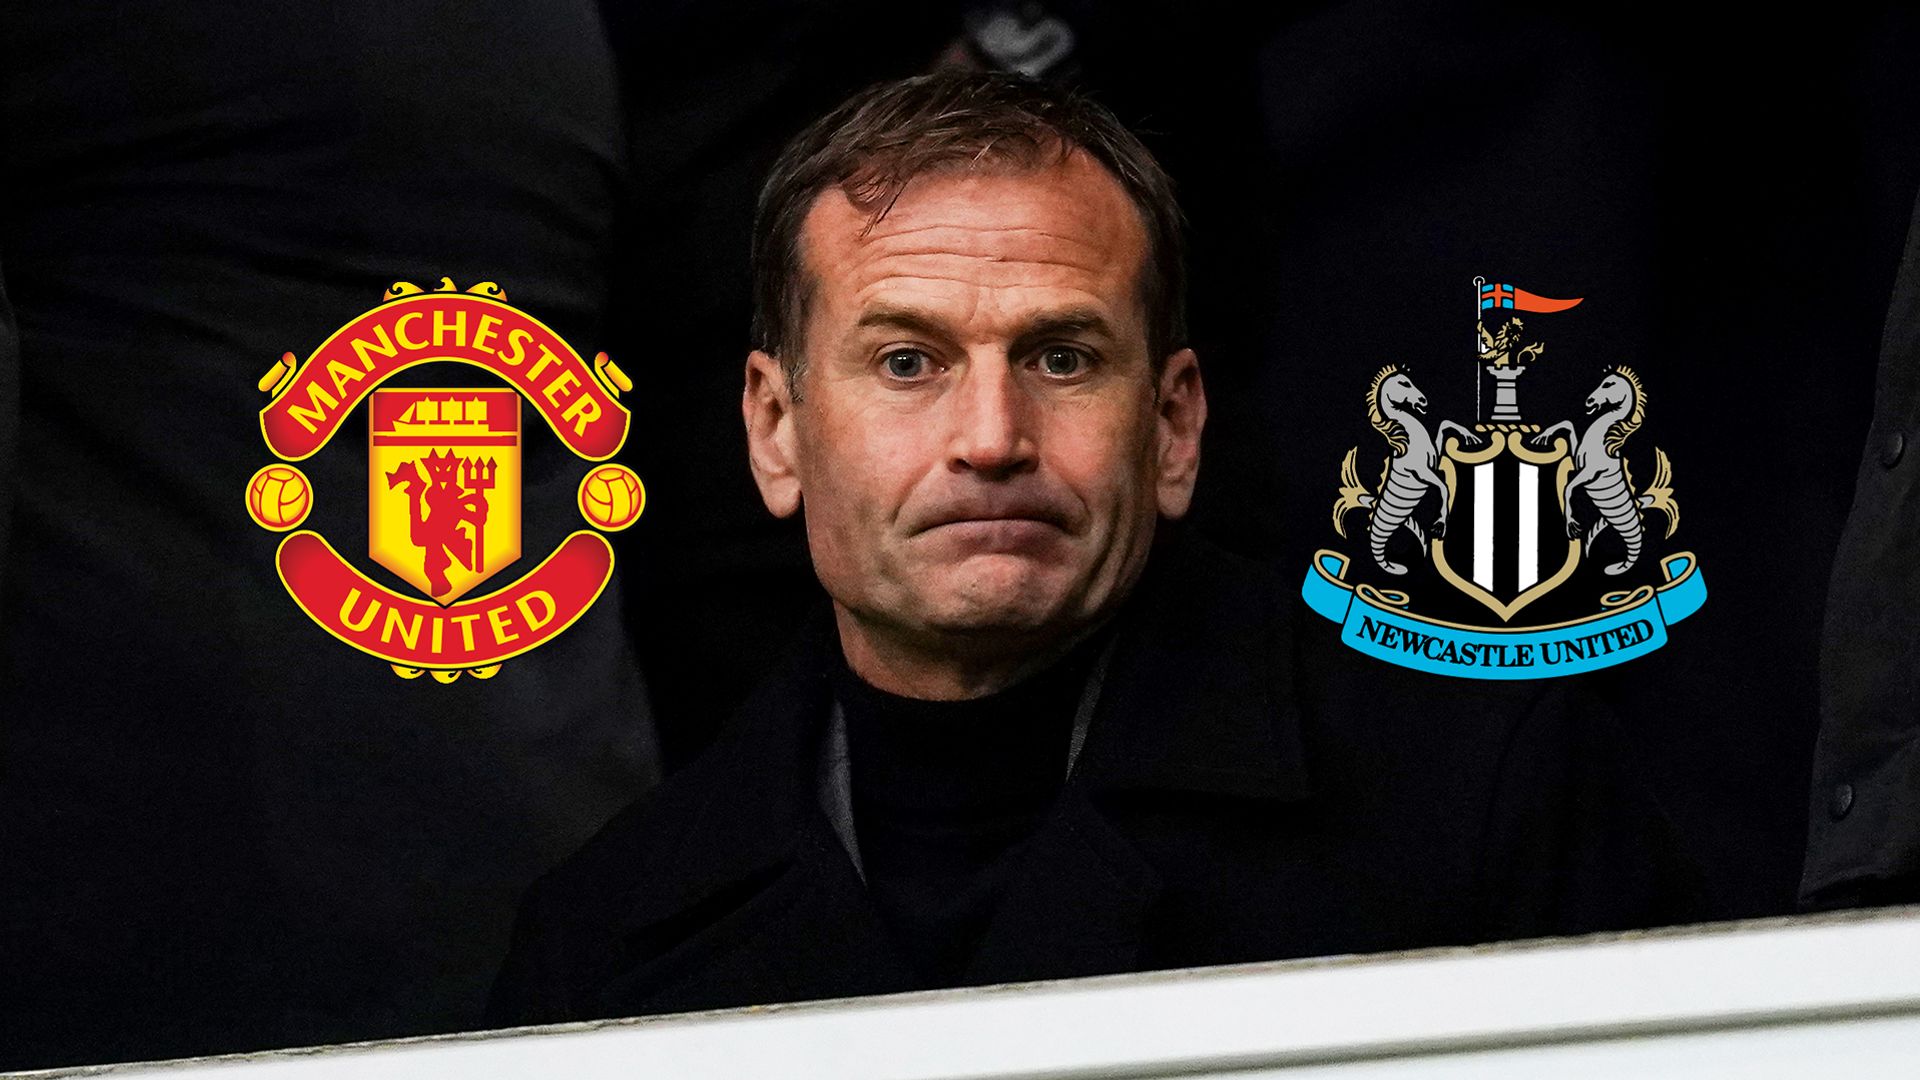 Man Utd appoint Ashworth after deal agreed with Newcastle